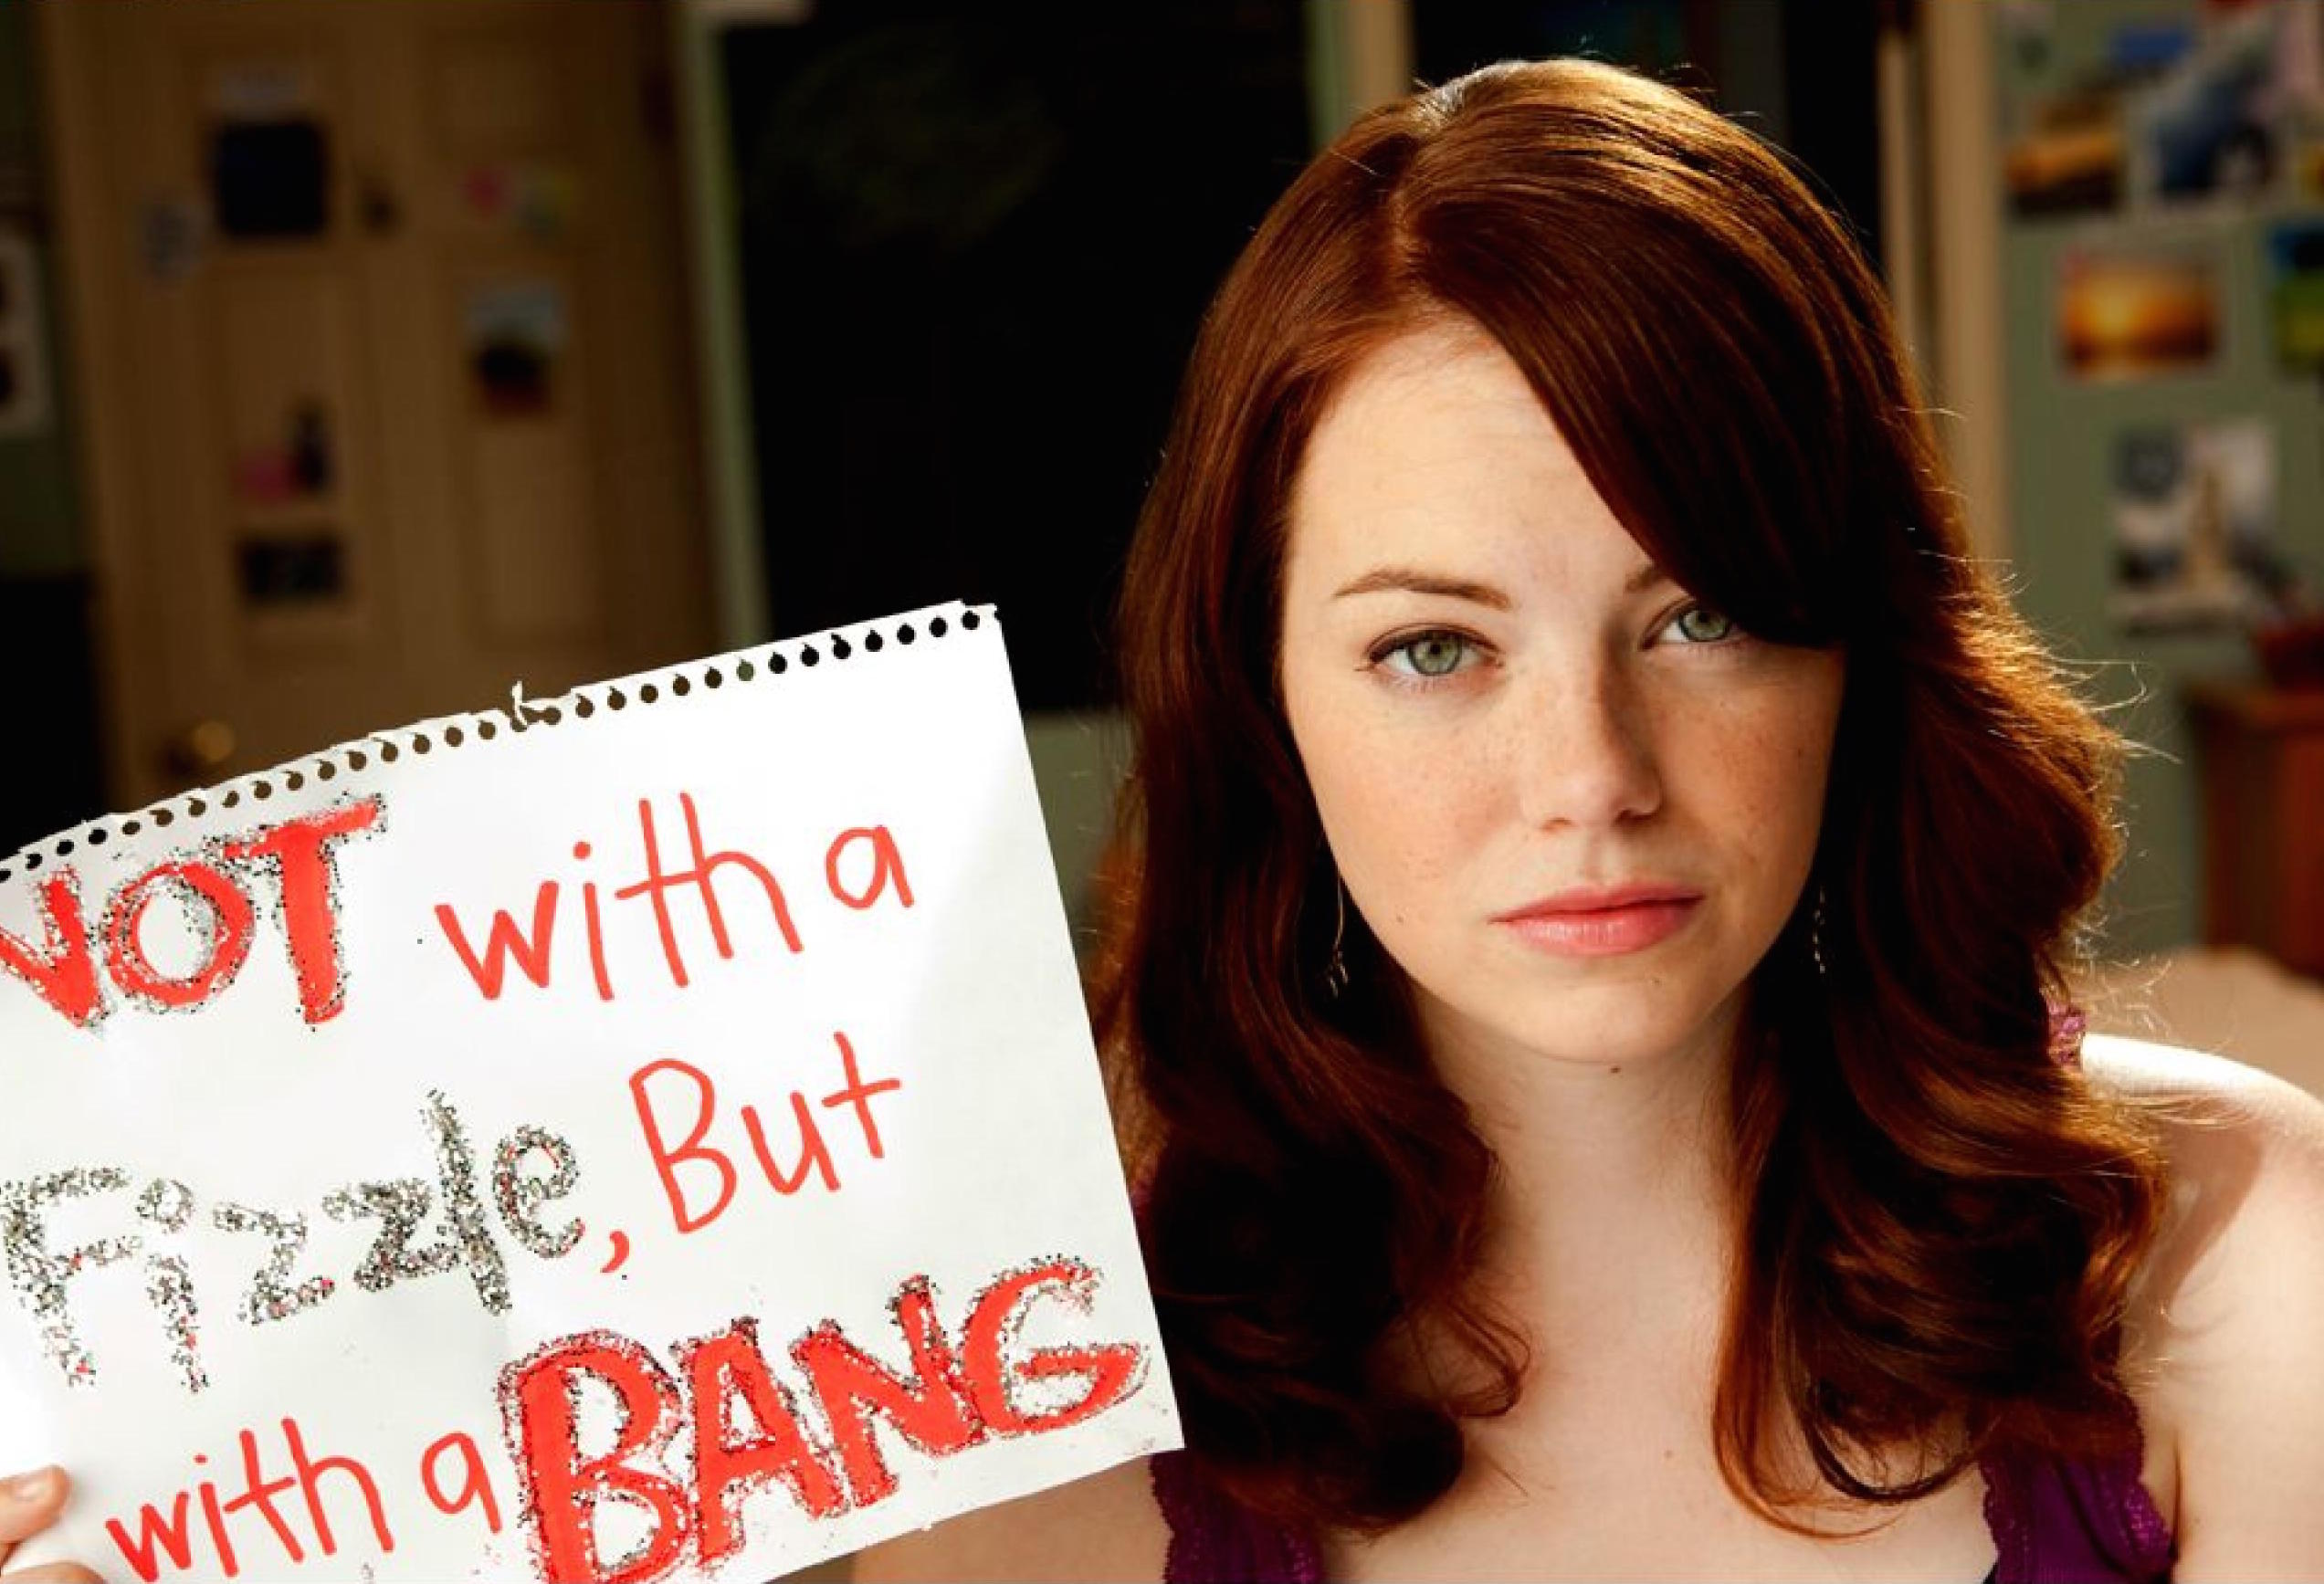 Easy A - sign